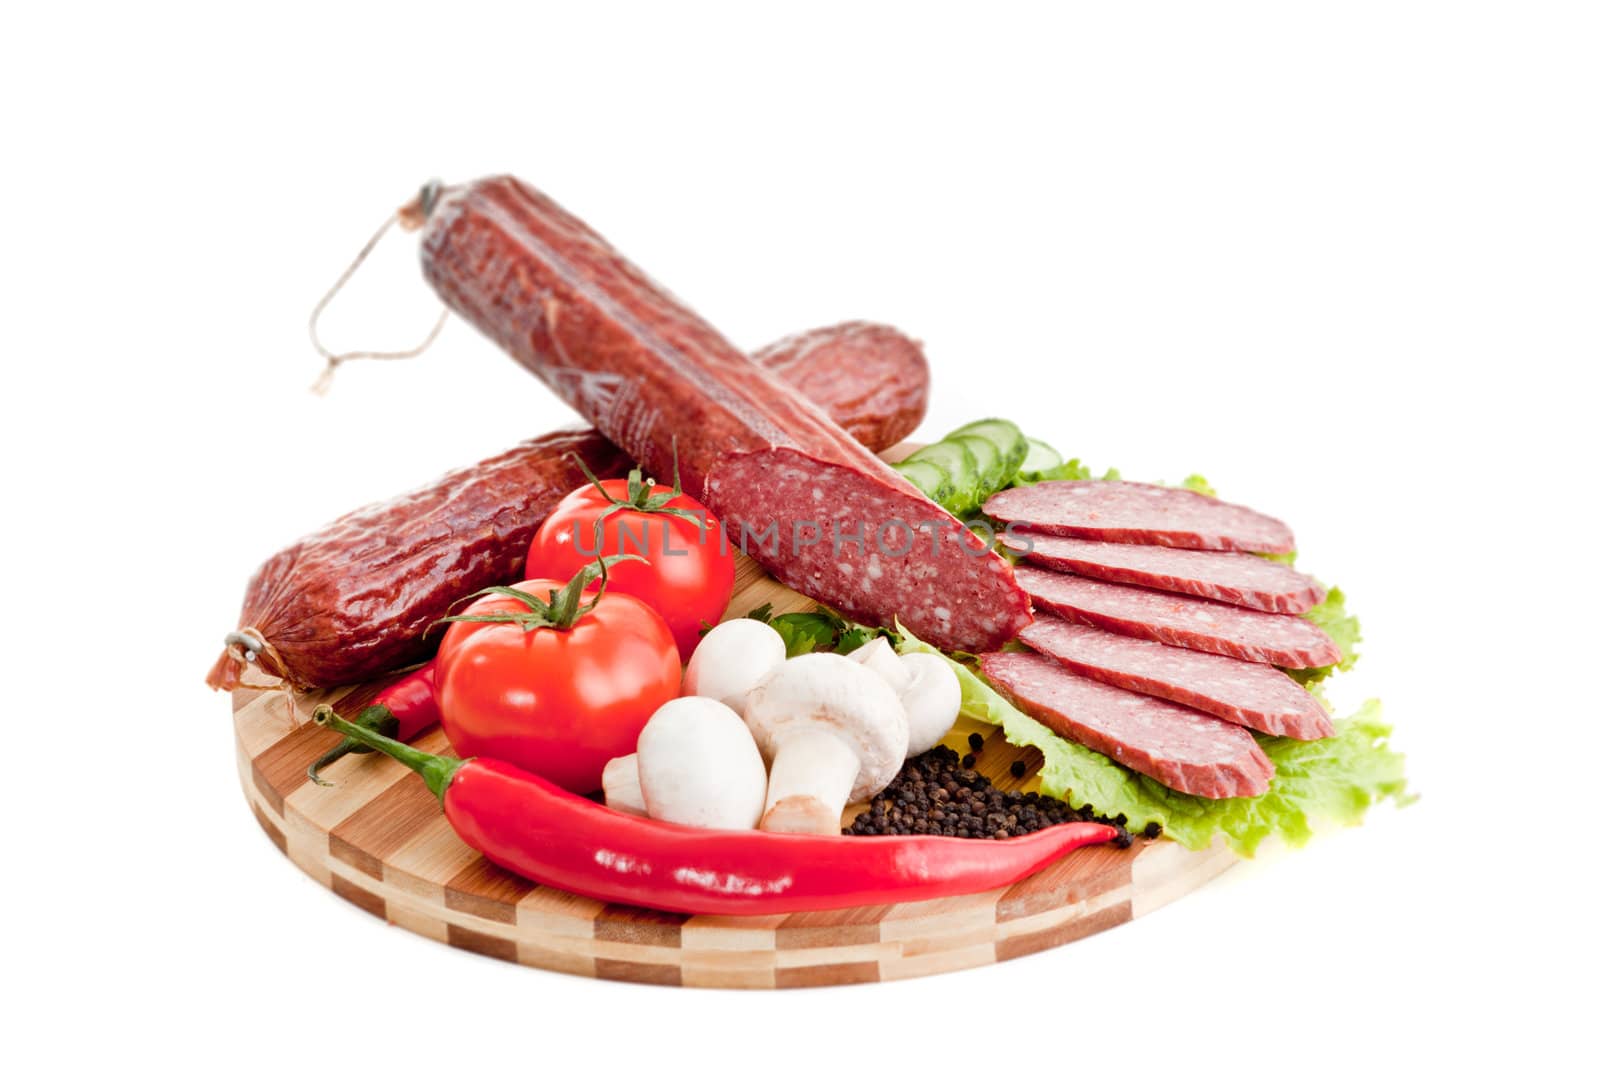 sliced sausage with vegetables and red papper for site